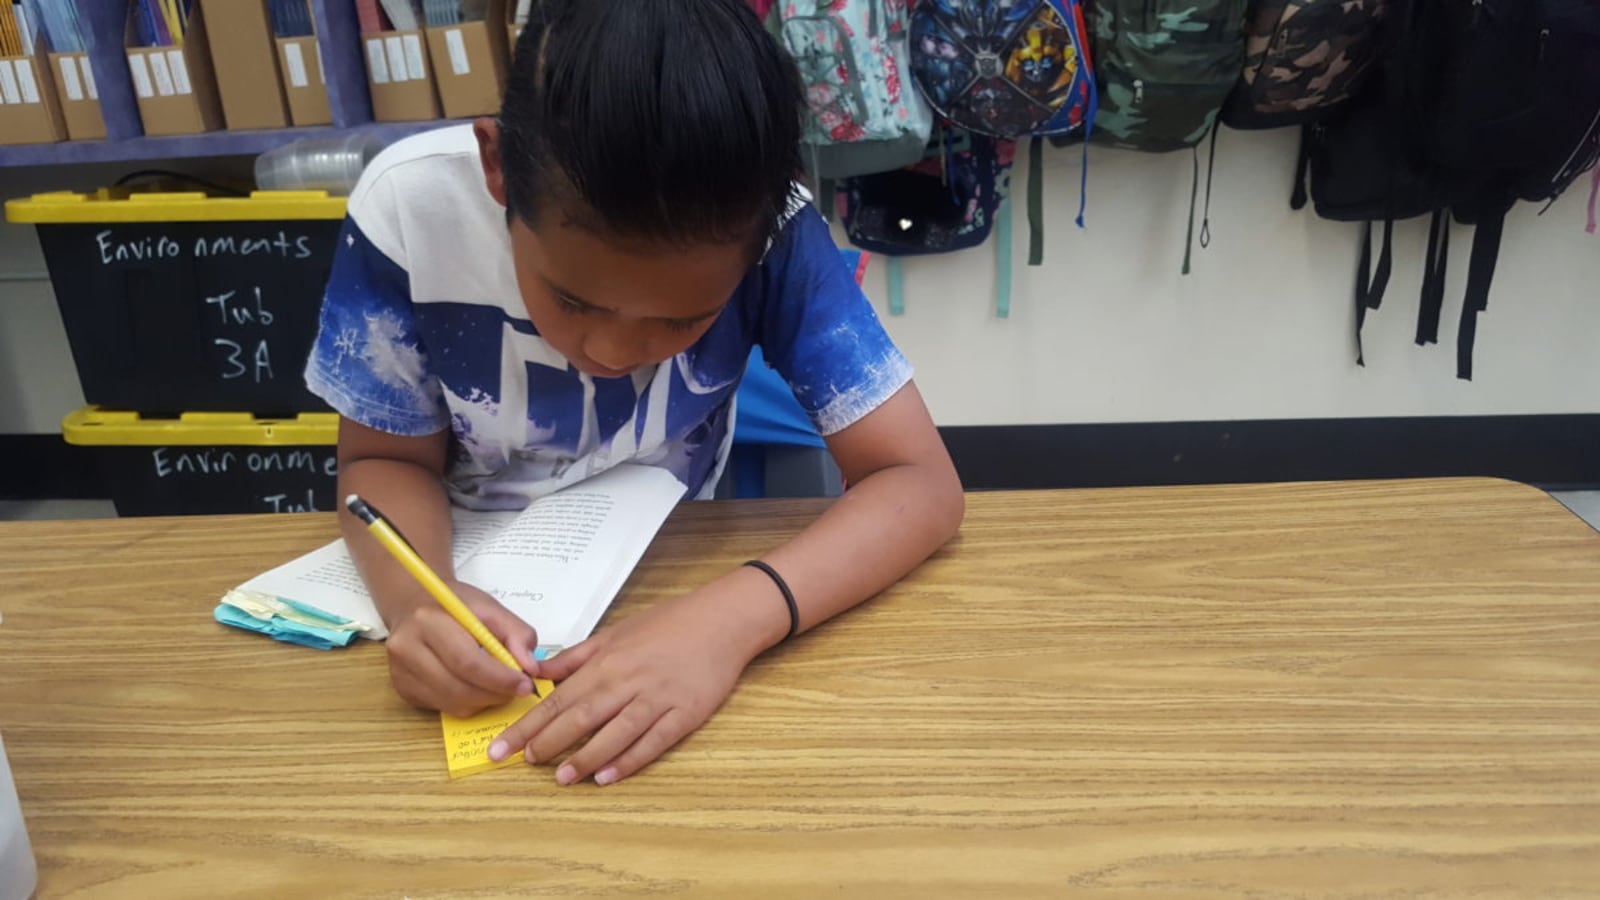 A fourth grader in Aurora's Peoria Elementary takes notes while reading.